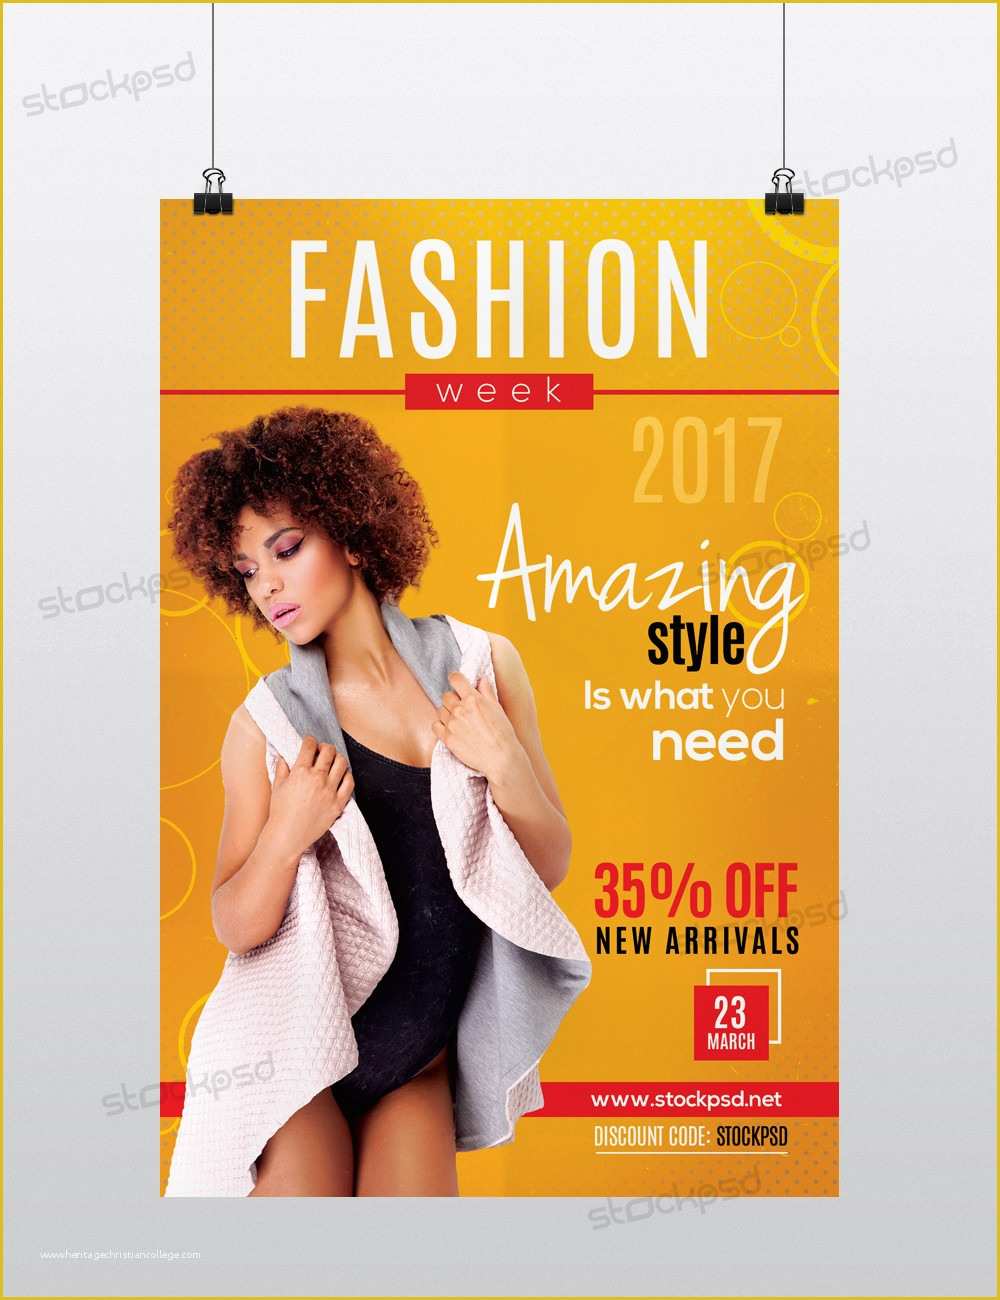 Free Clothing Store Flyer Templates Of Fashion Week 2017 Free Psd Flyer Template Stockpsd